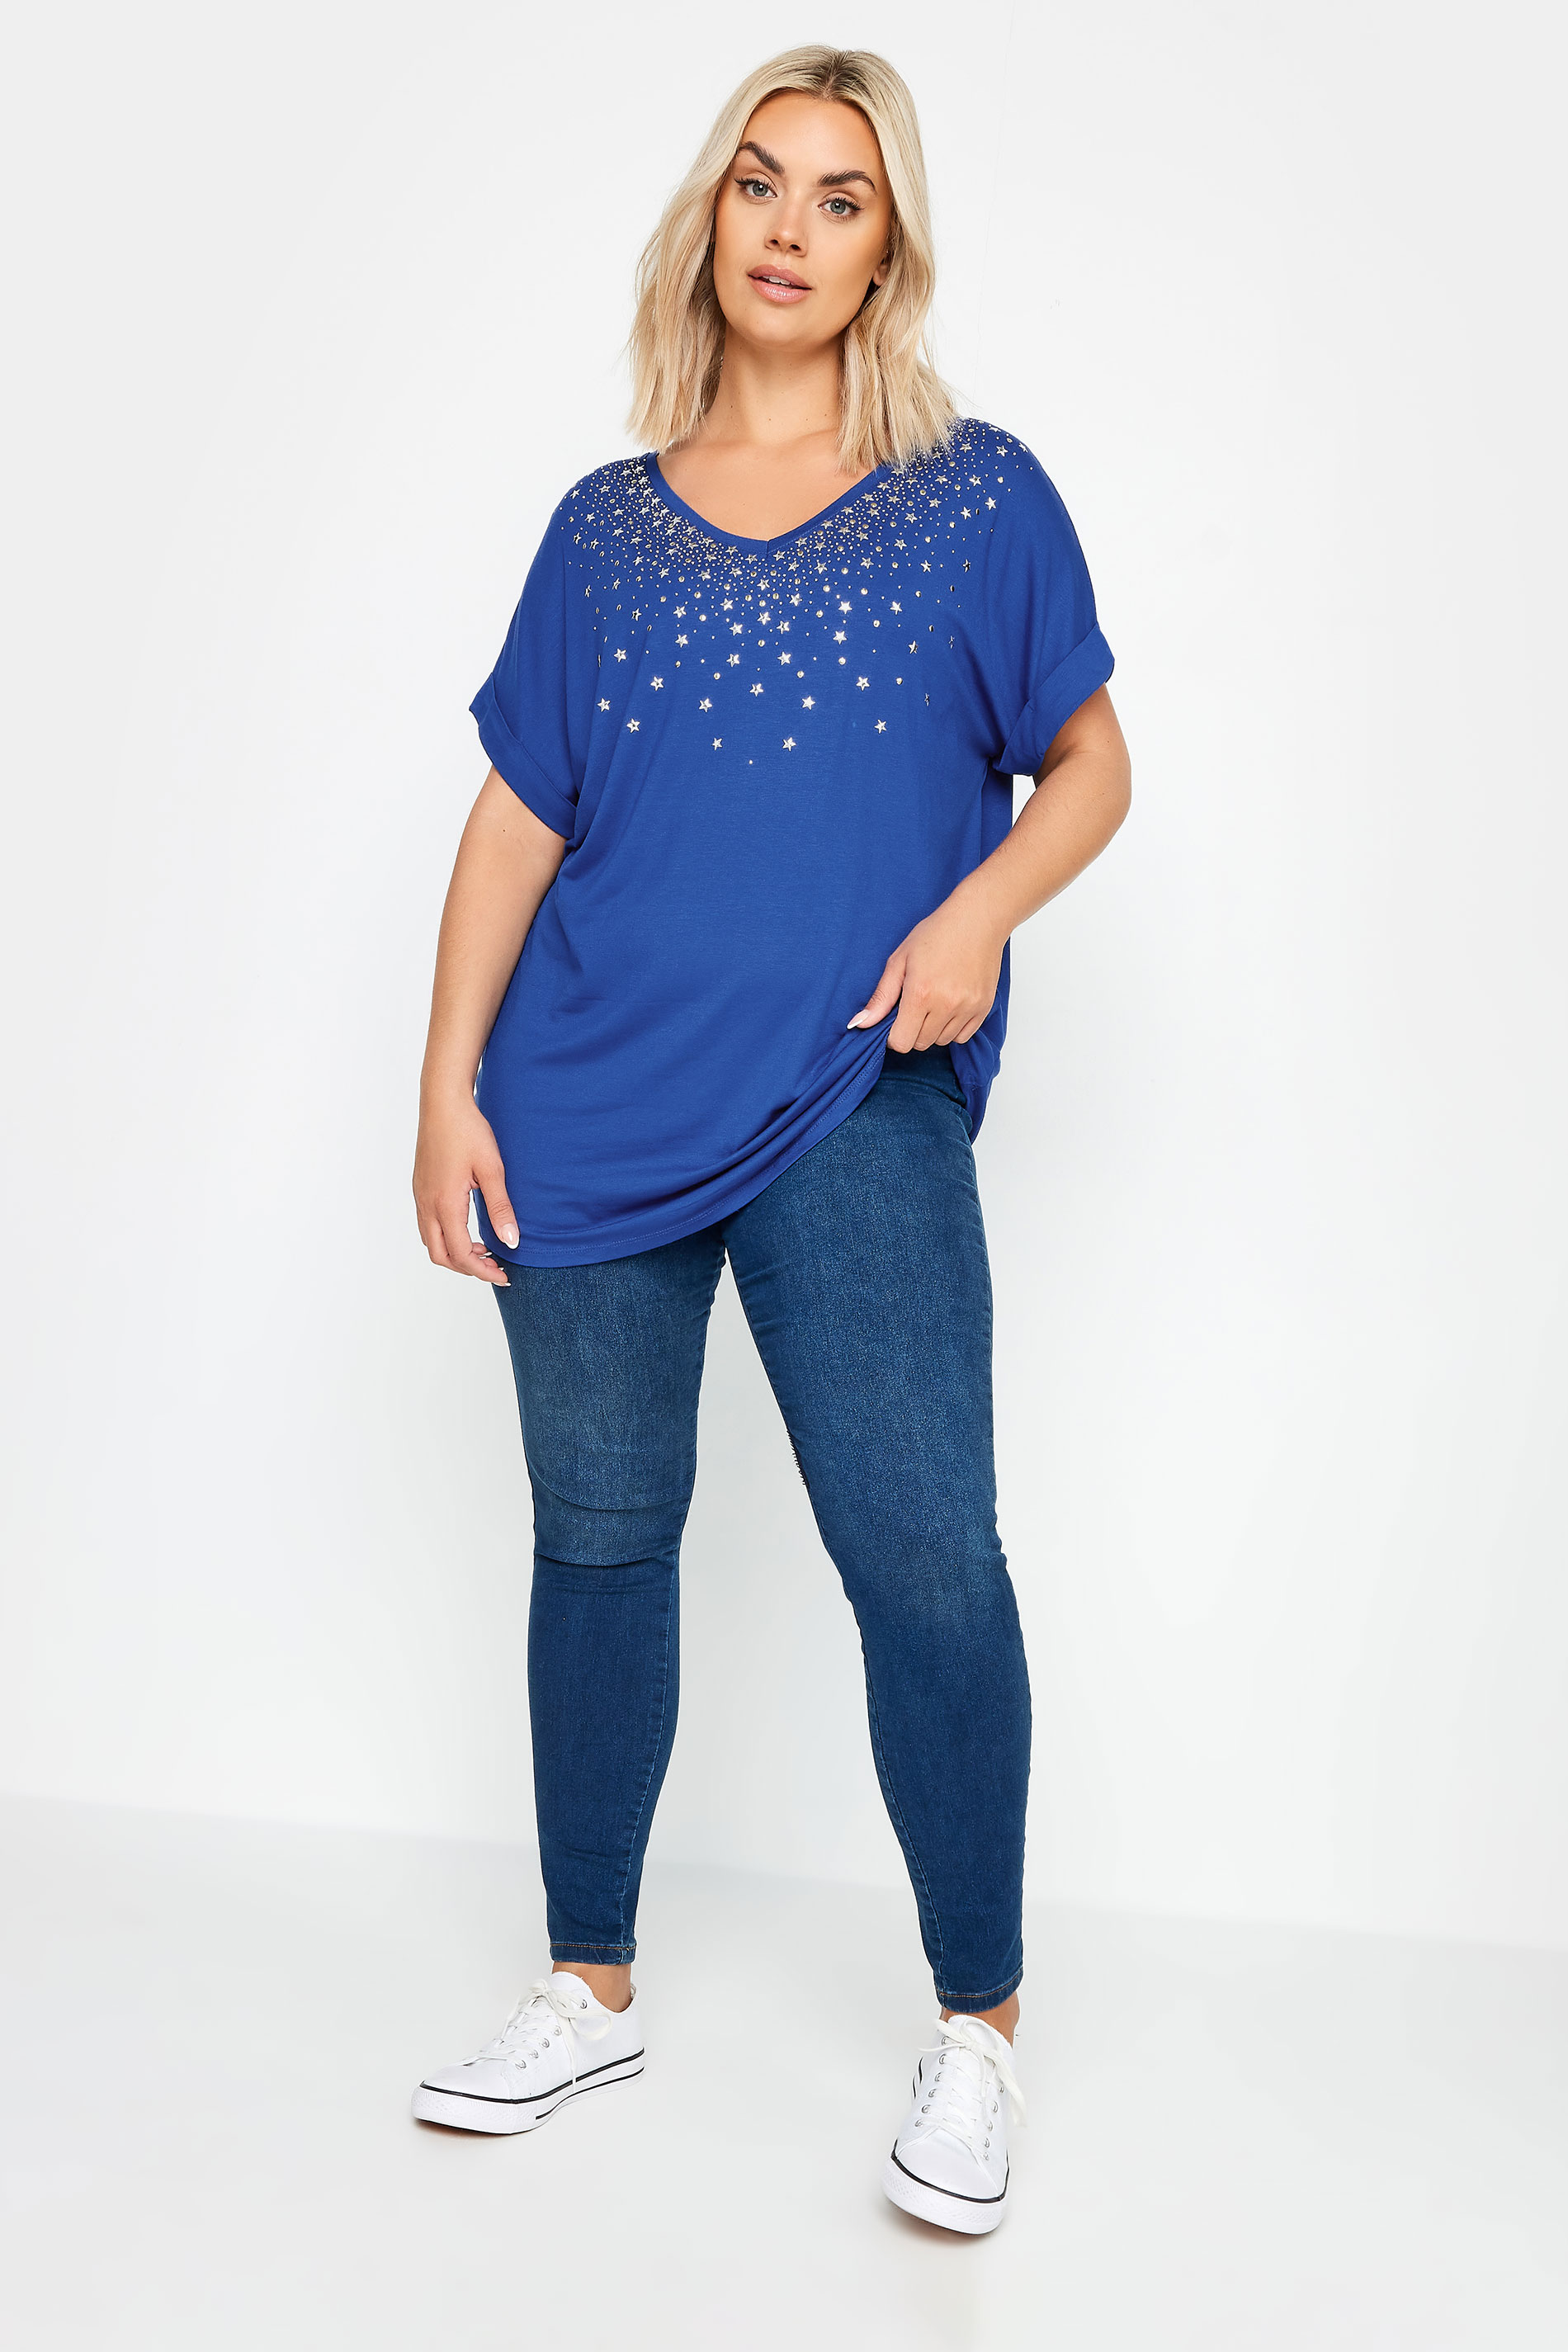 YOURS Plus Size Navy Blue Sequin Star Embellished T-Shirt | Yours Clothing 3